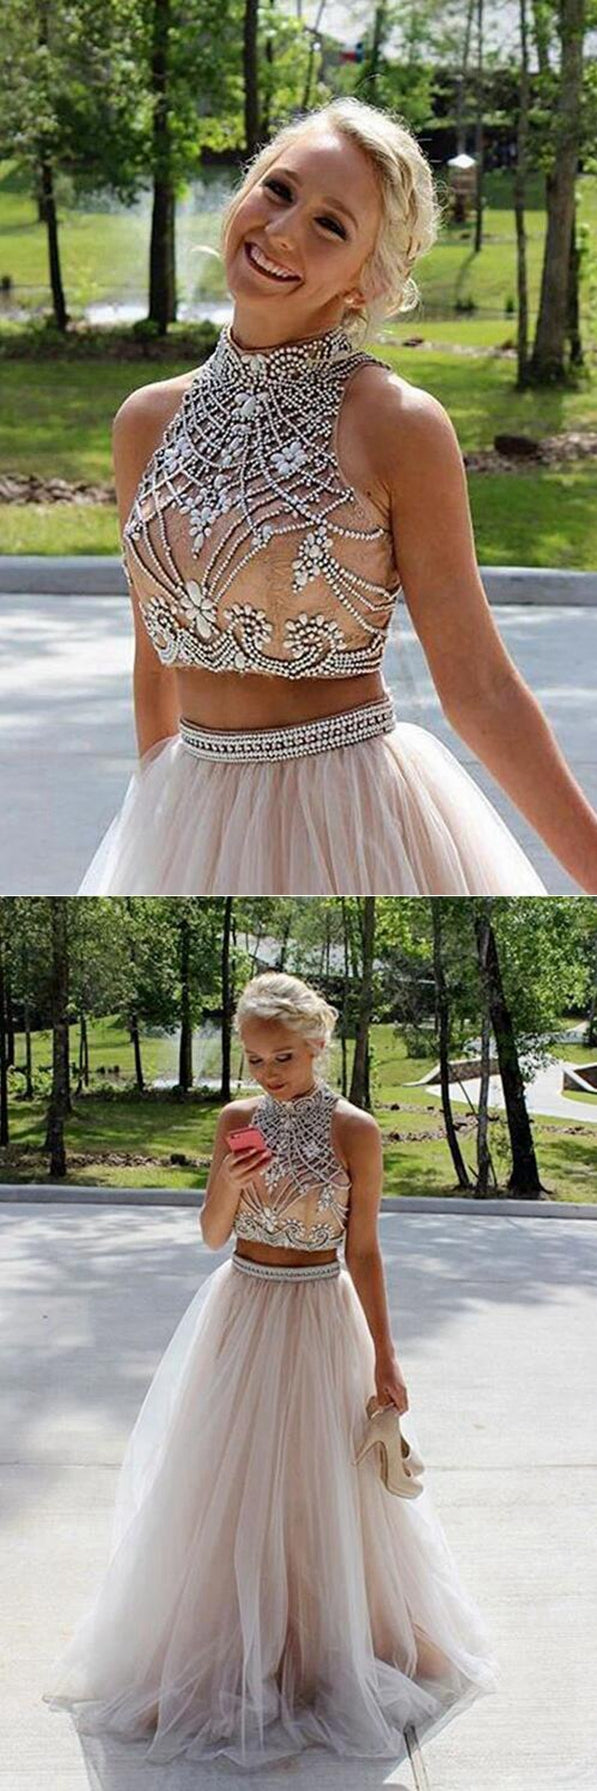 Two Pieces Prom Dresses Halter Neckline, Evening Dress ,Winter Formal Dress, Pageant Dance Dresses, Back To School Party Gown, PC0590 - Promcoming